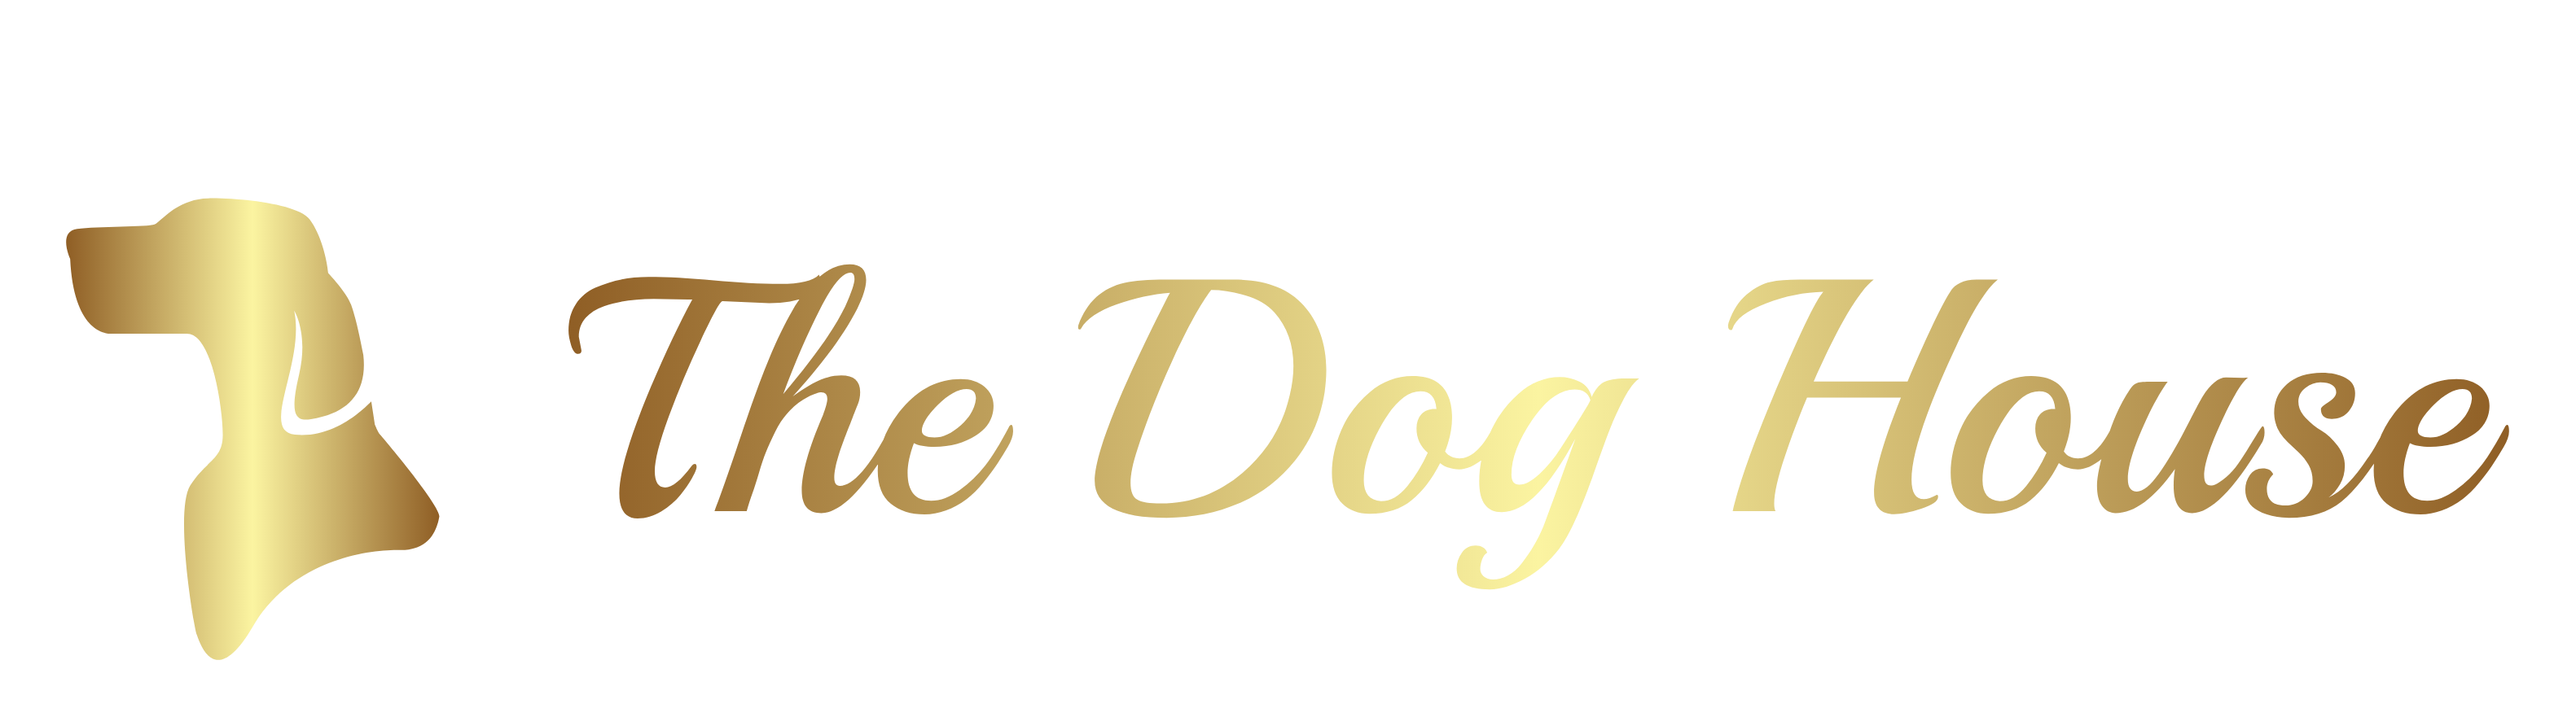 The Dog House Worplesdon, Pirbright, Woking, Guildford, Surrey